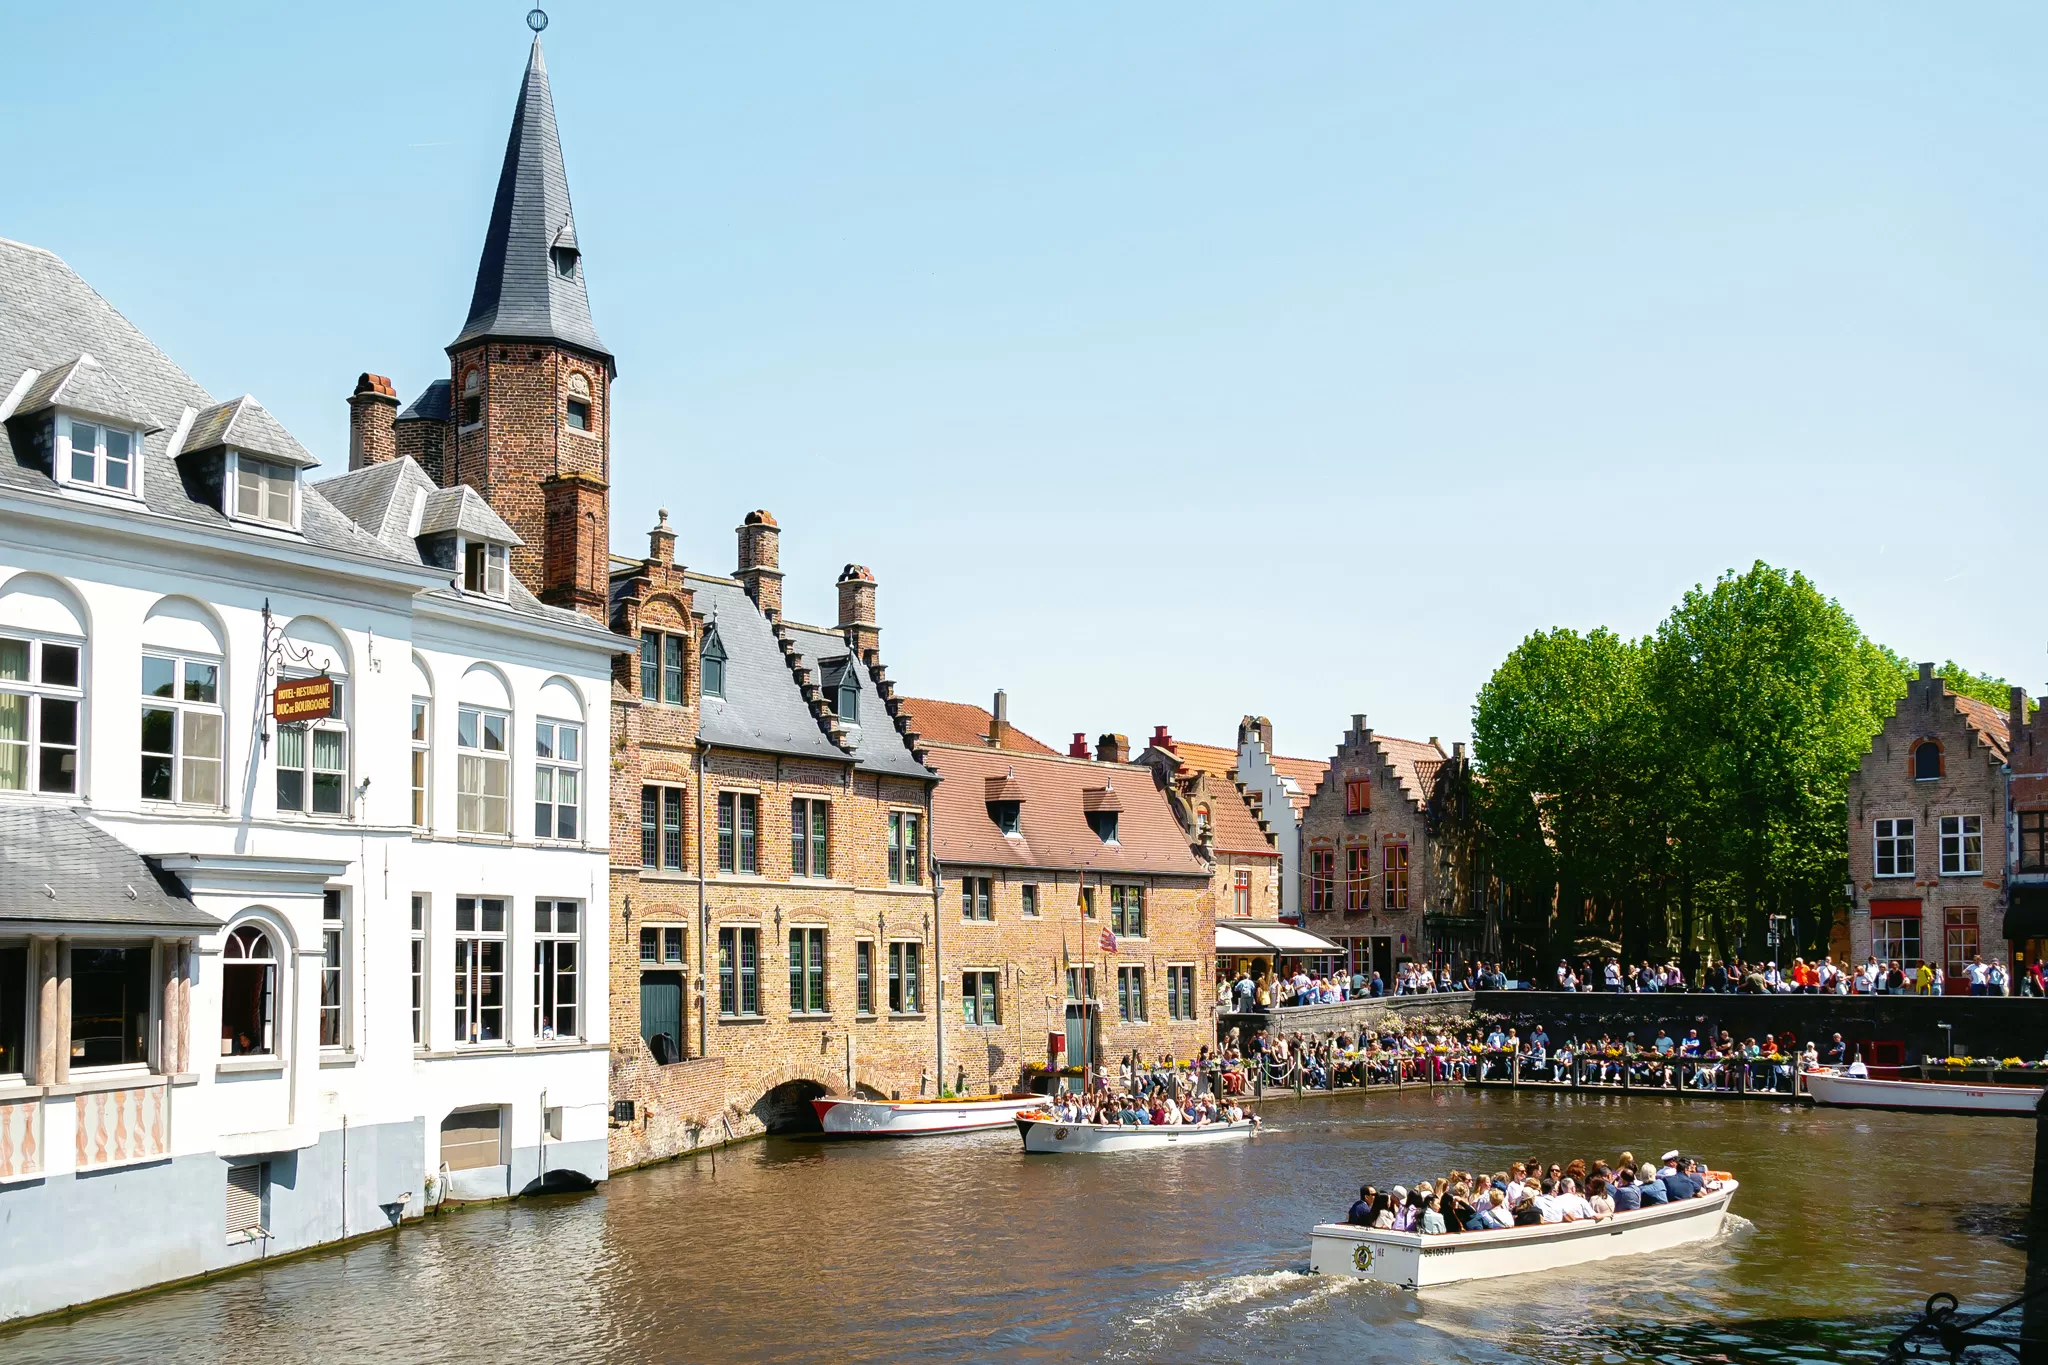 historic Buildings and people waiting in line for a canal tour in Brugges Belgium